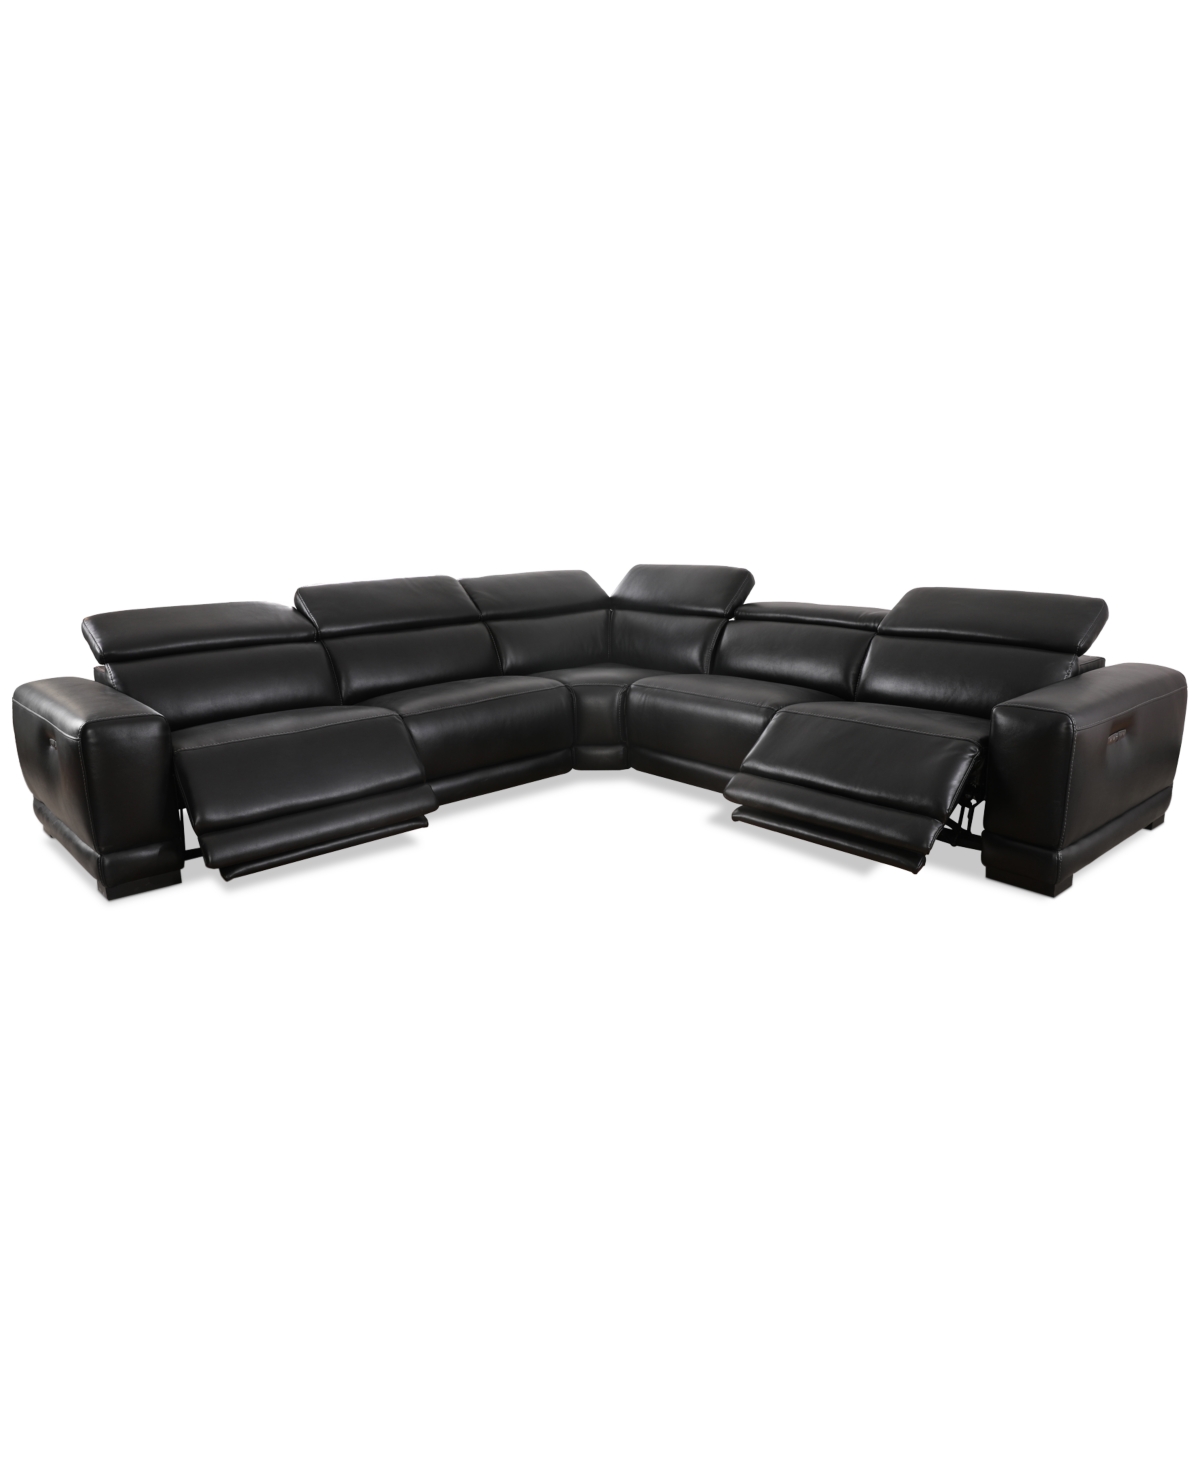 Furniture Krofton 5-pc. Beyond Leather Fabric Sectionals With 2 Power Motion Recliners, Created For Macy's In Blackberry